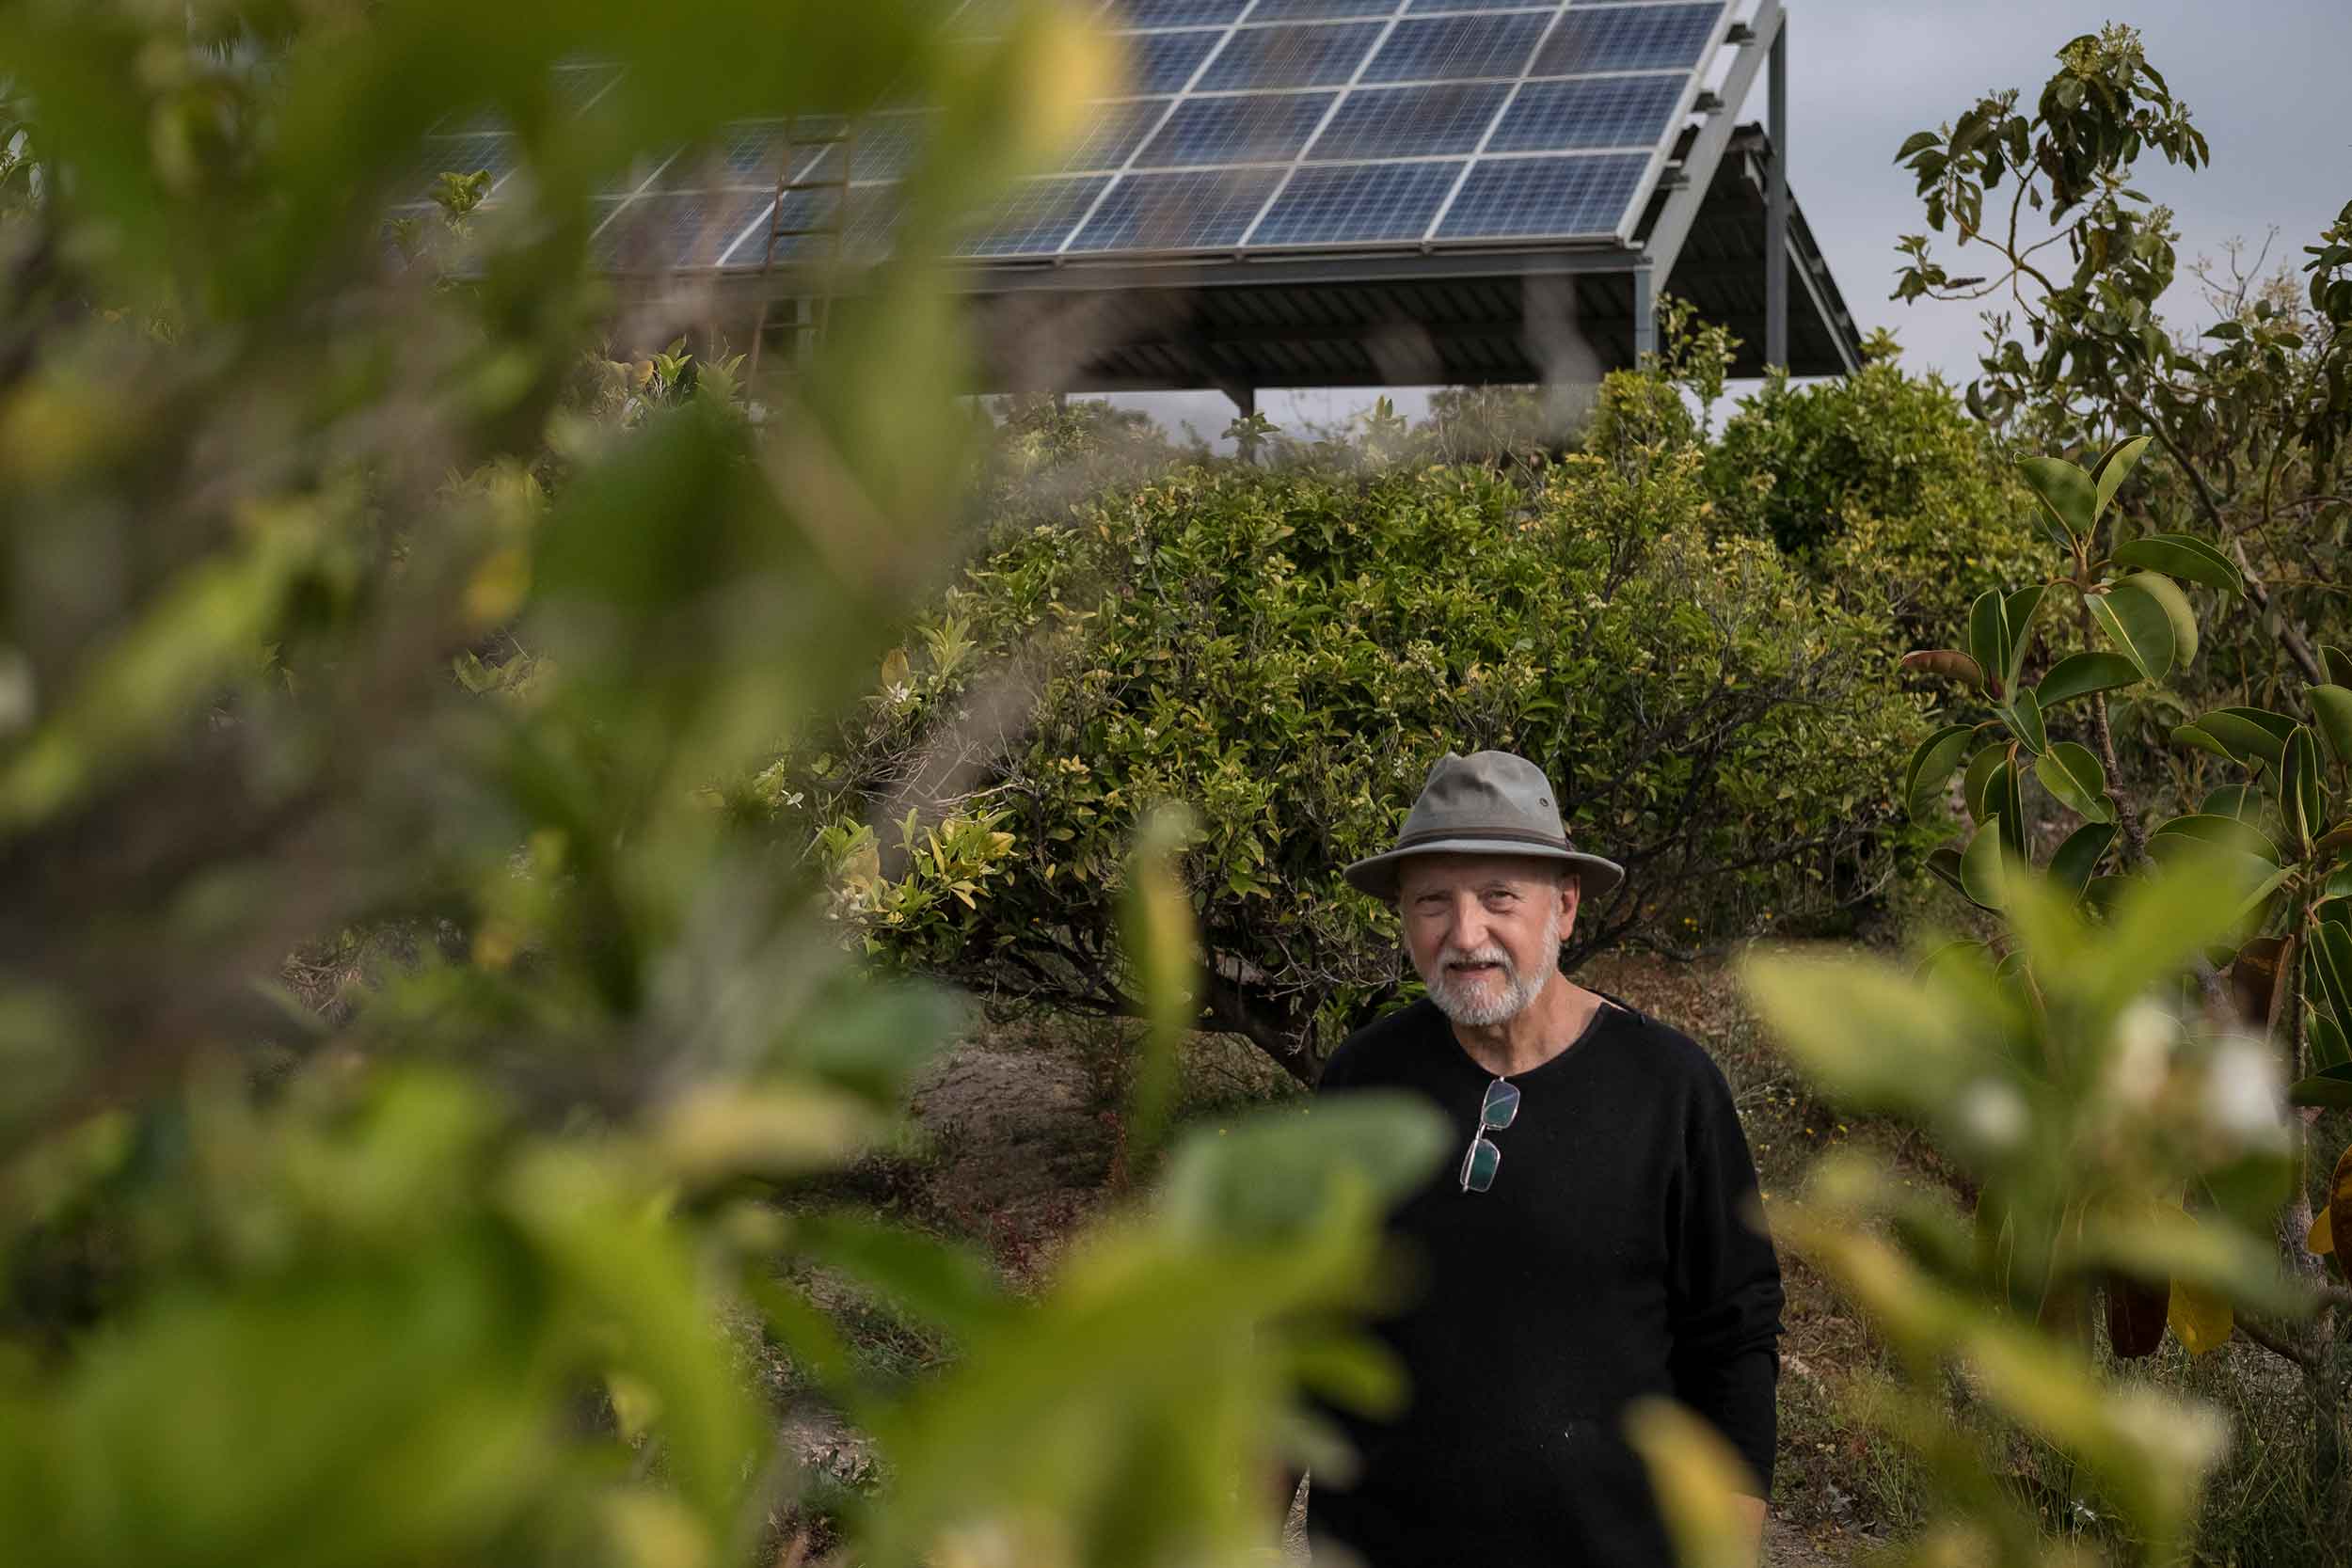 To help fix the coast of living crisis, scale up solar and renewable energy generation